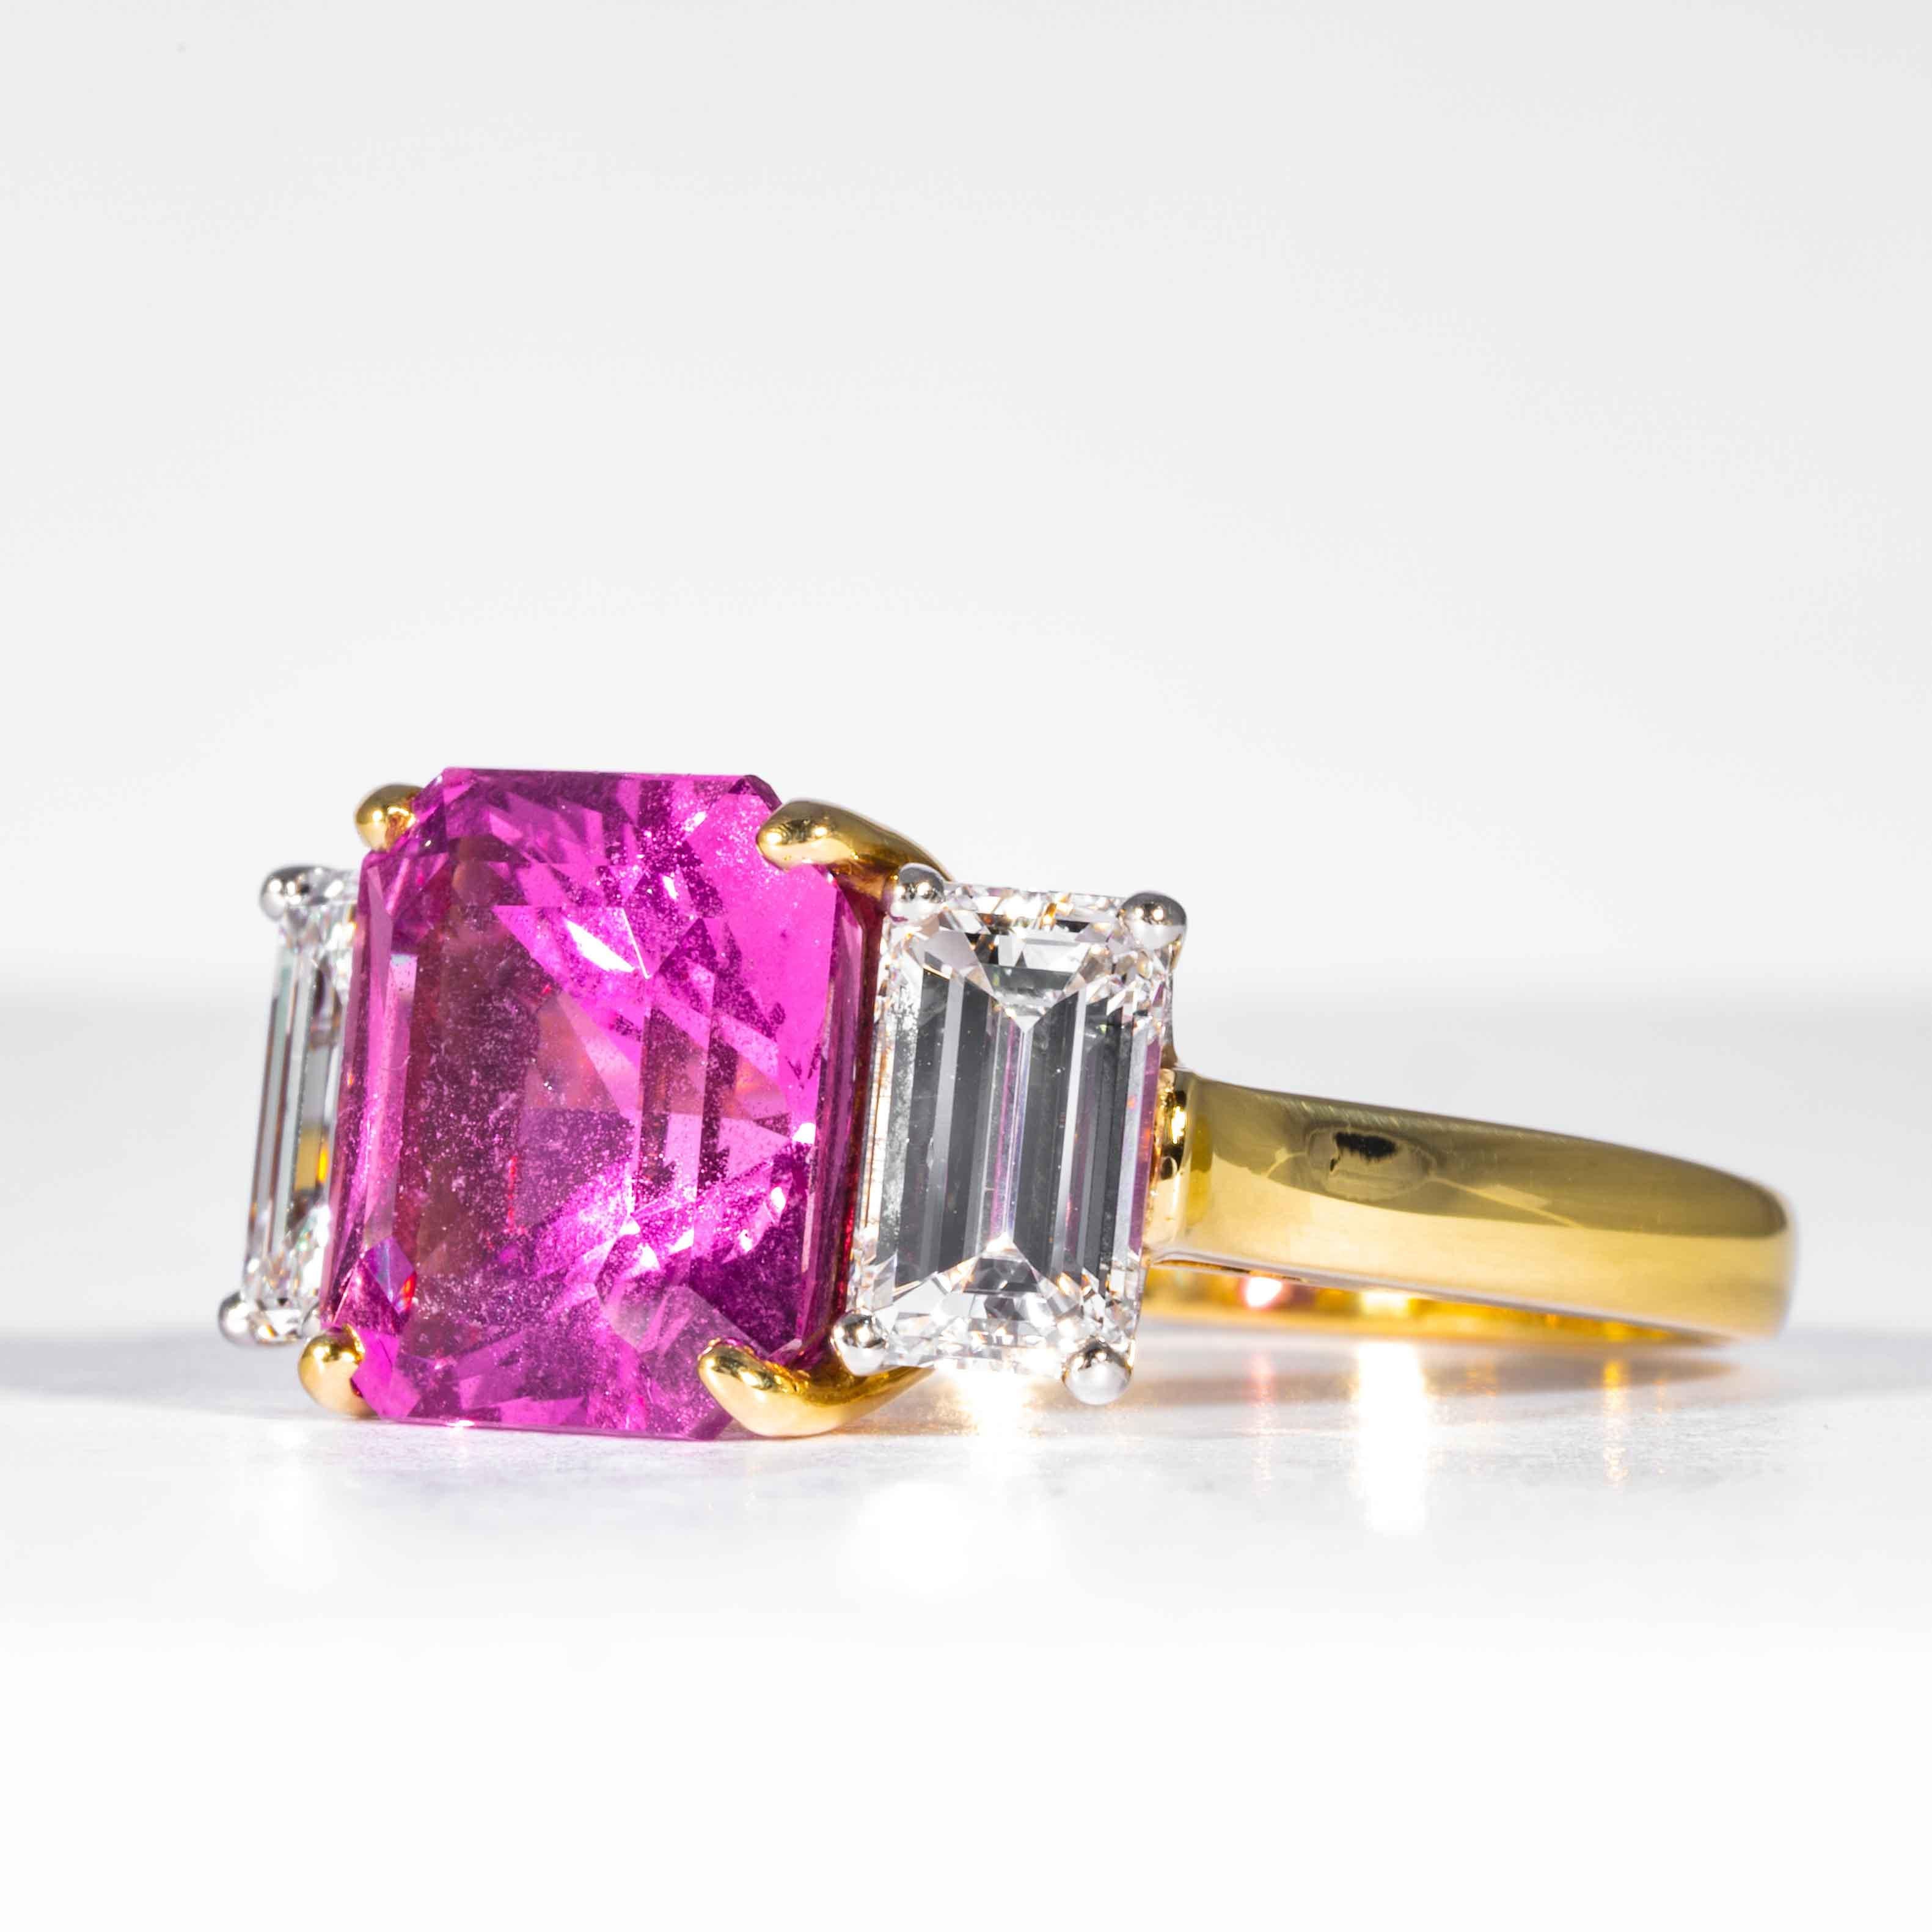 Radiant Cut Shreve, Crump & Low 6.13 Carat GIA Certified Pink Sapphire and Diamond Ring